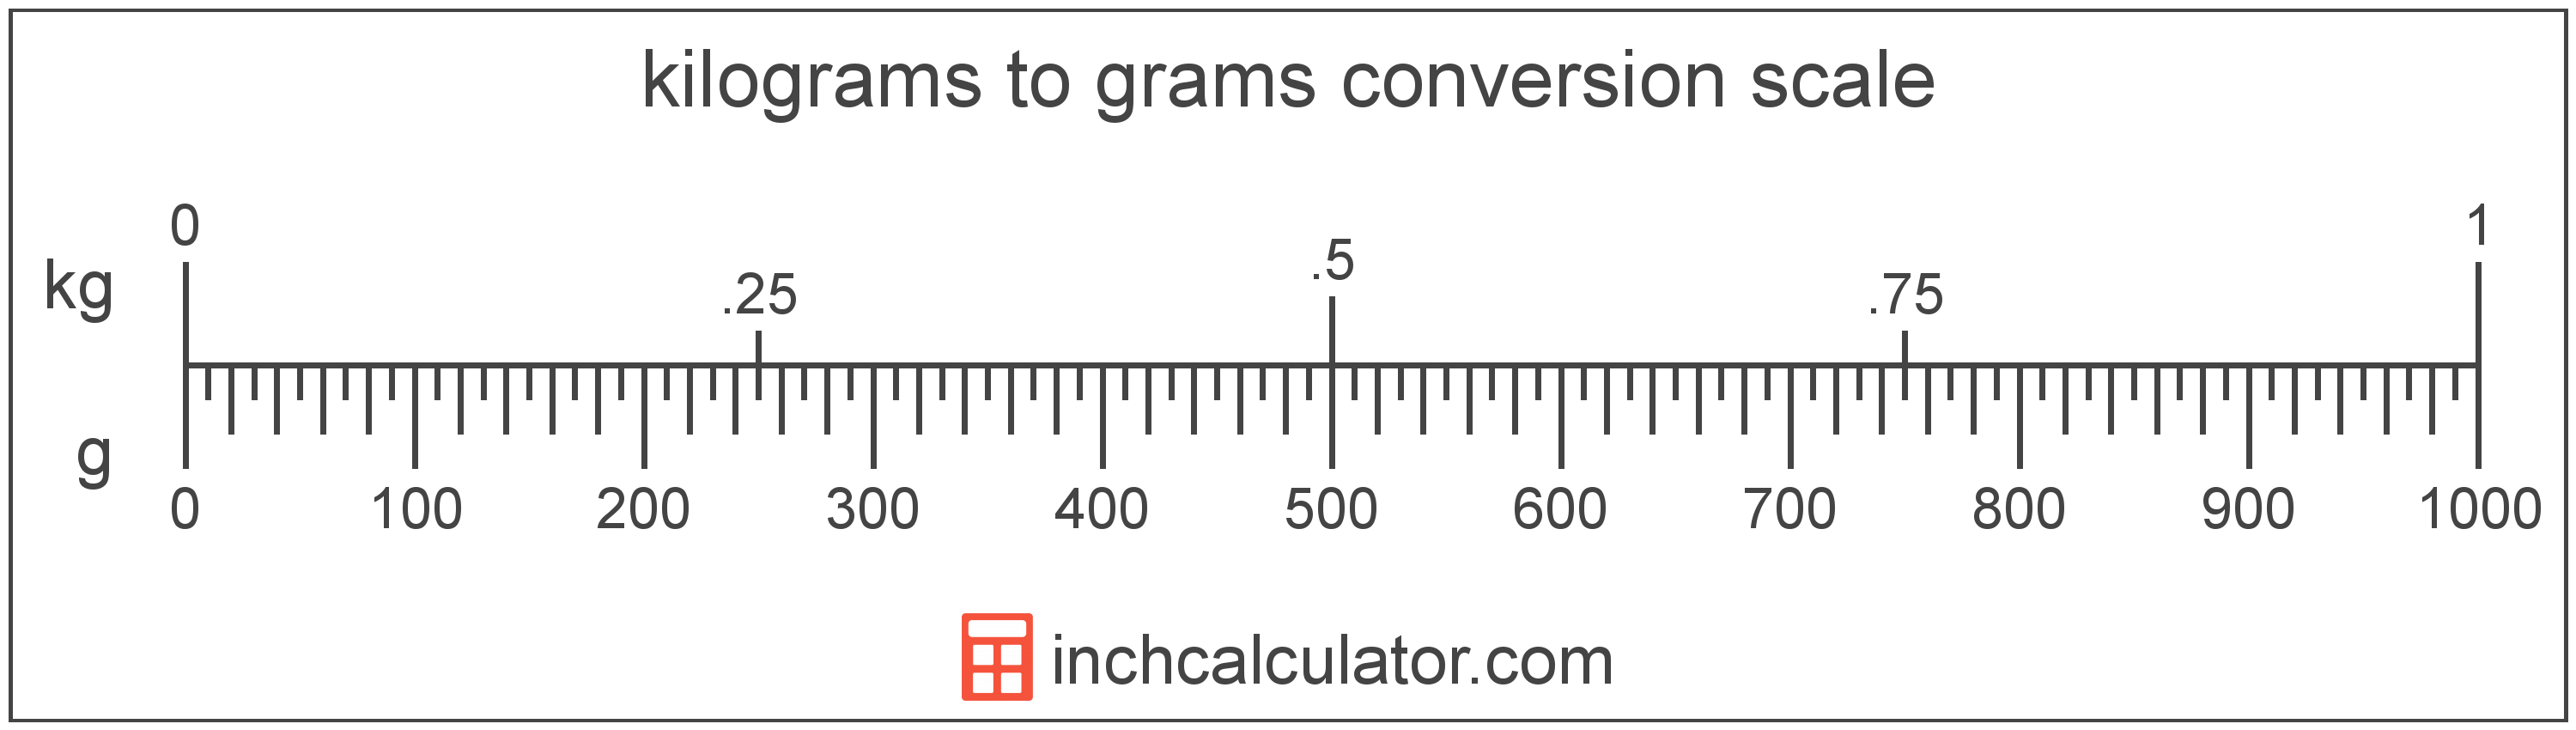 conversion scale showing kilograms and equivalent grams weight values